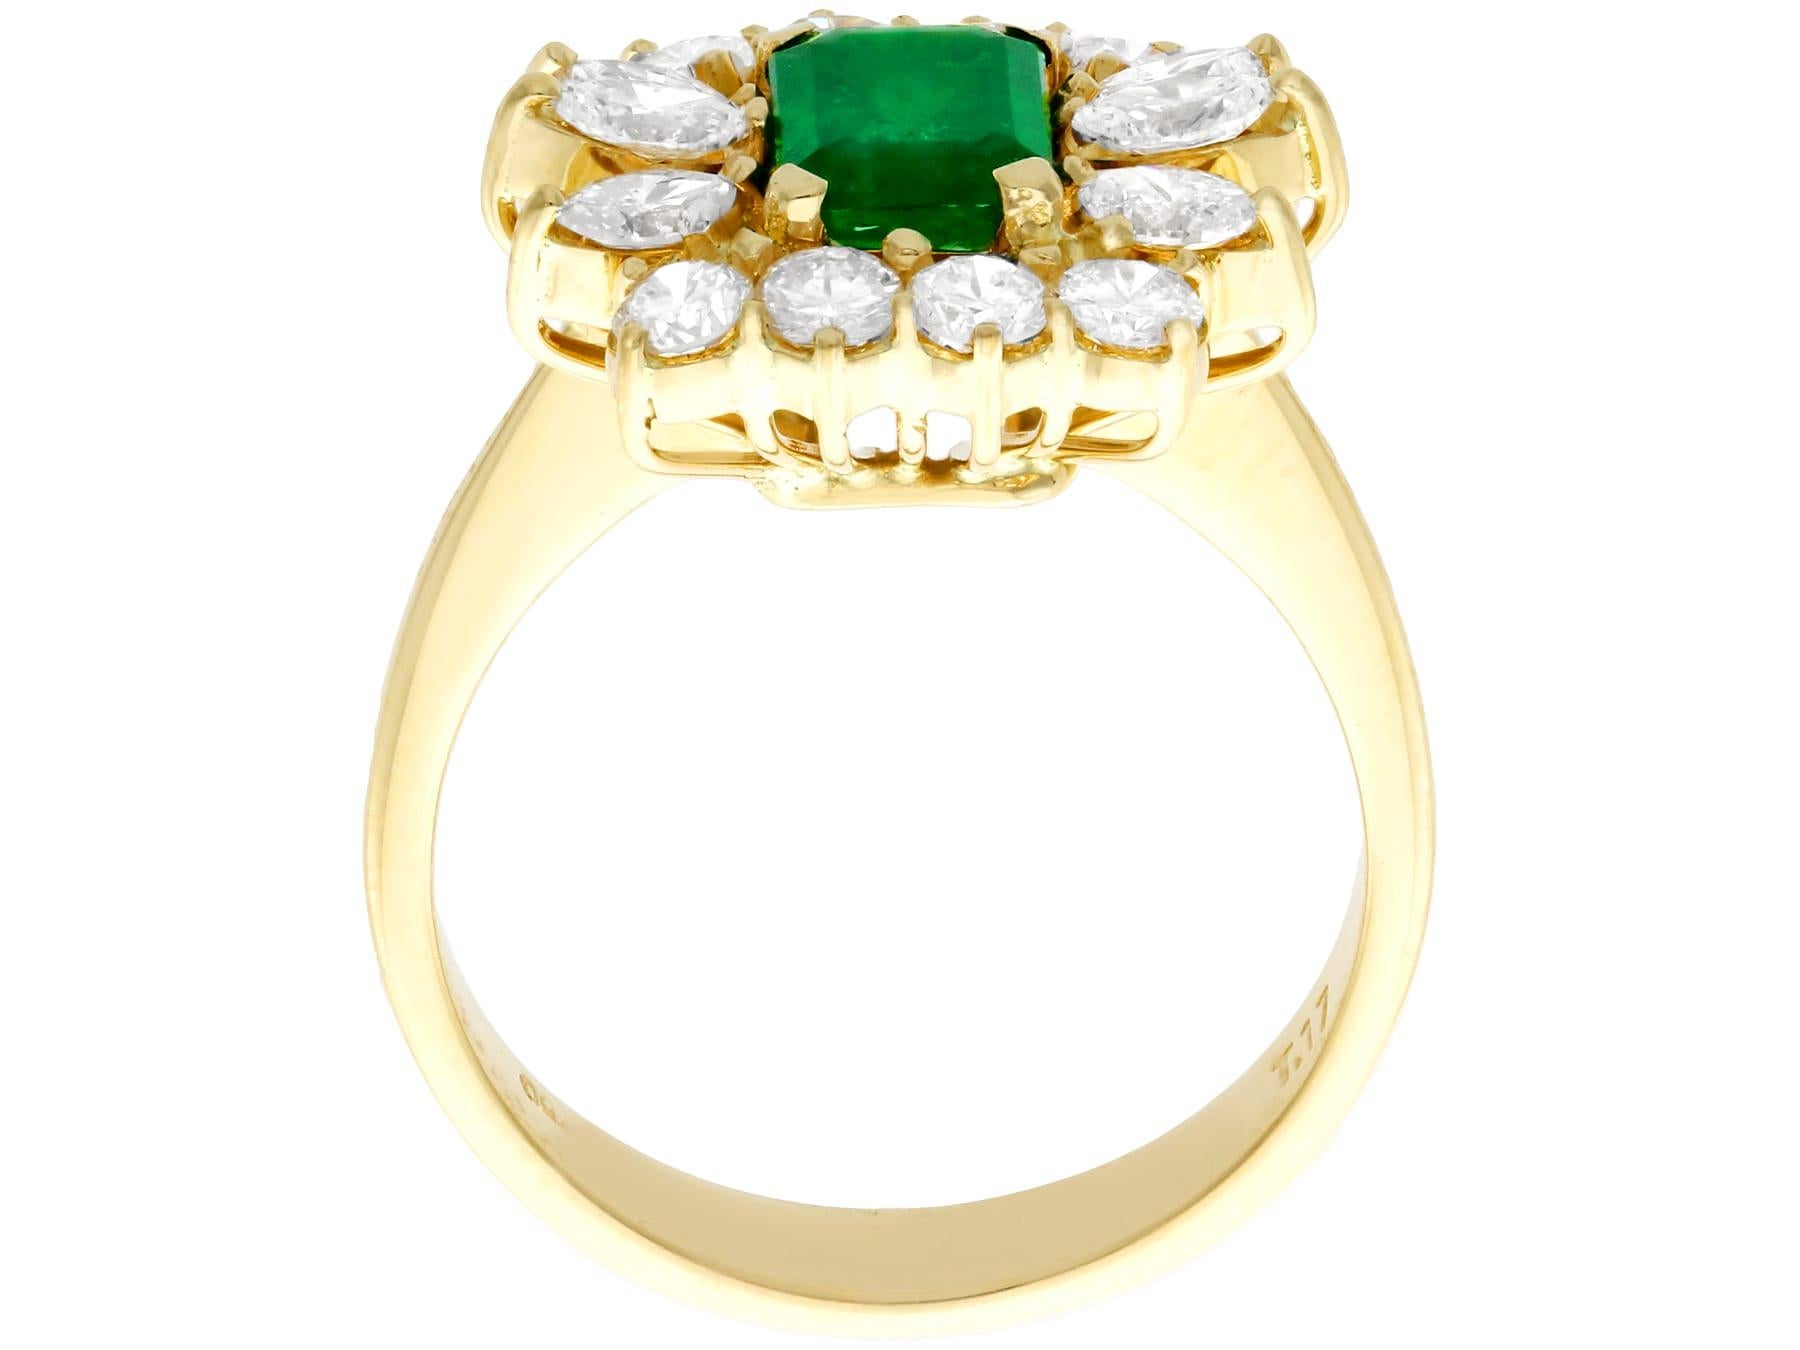 1980s Emerald Cut Emerald 1.32 Carat Diamond Yellow Gold Cocktail Ring For Sale 1